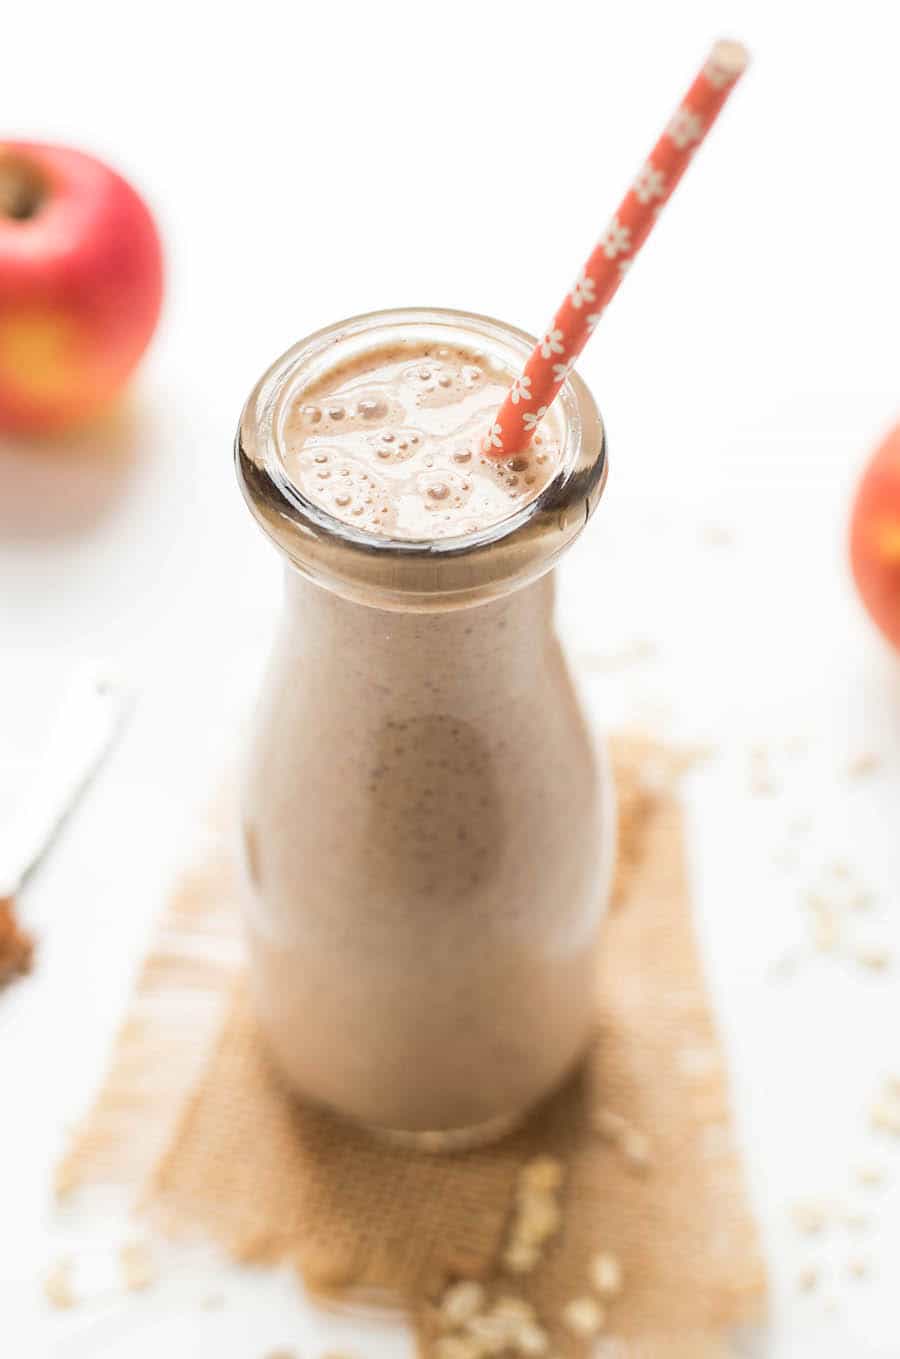 CREAMY APPLE PIE SMOOTHIE -- with apples, oats and cinnamon for the creamiest, dreamiest smoothie!